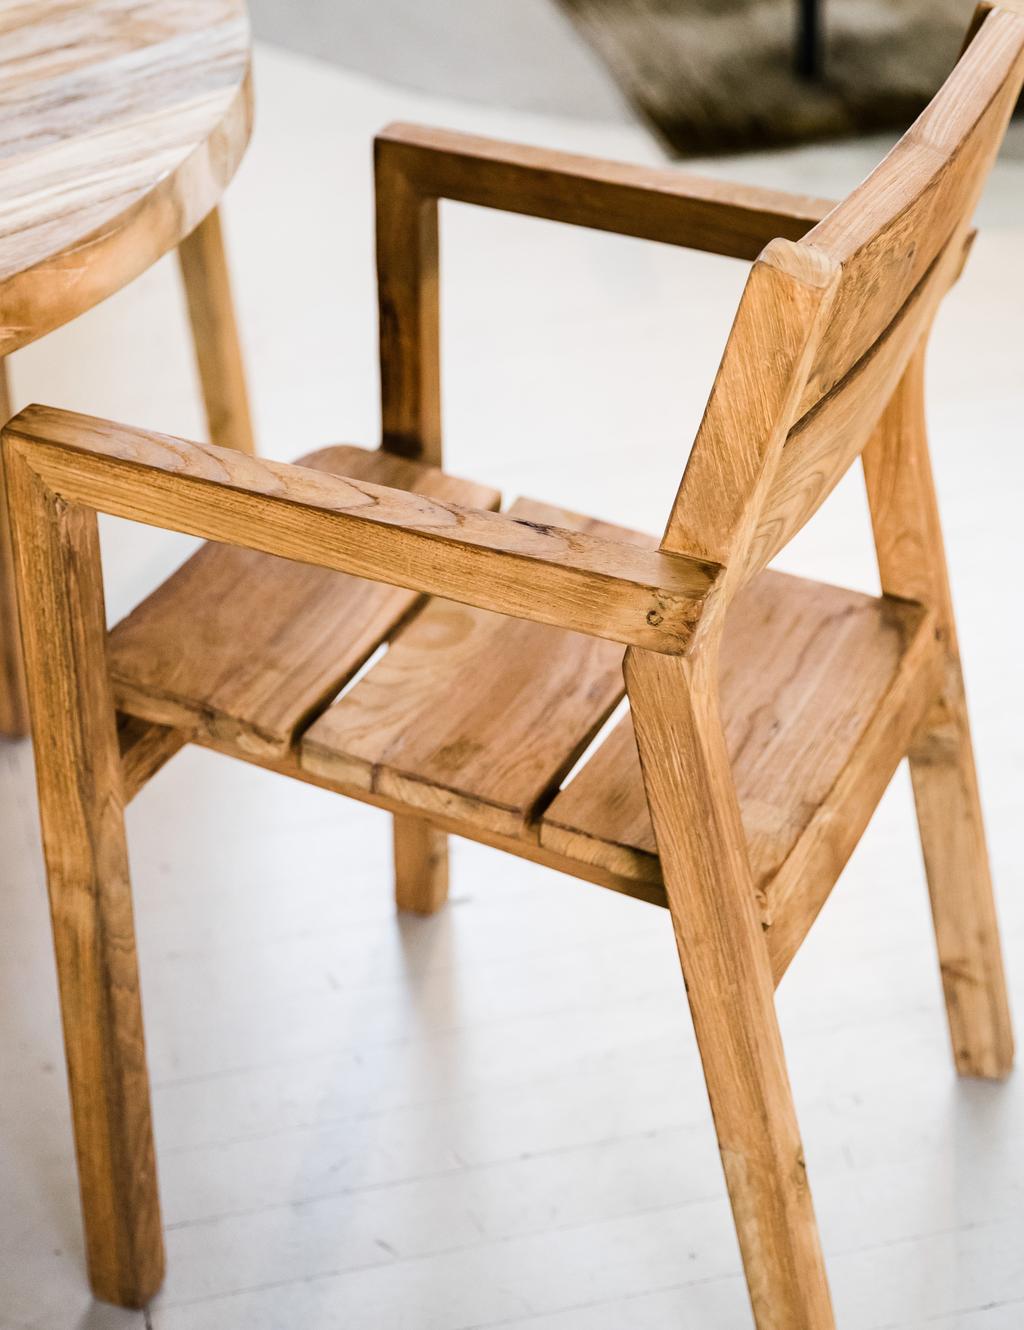 Teak When the furniture is very wet preferably warm soapy water and a soft bristled scrubbing brush or scotchbrite pad will remove most mottled, patchy environmental and man made stains.